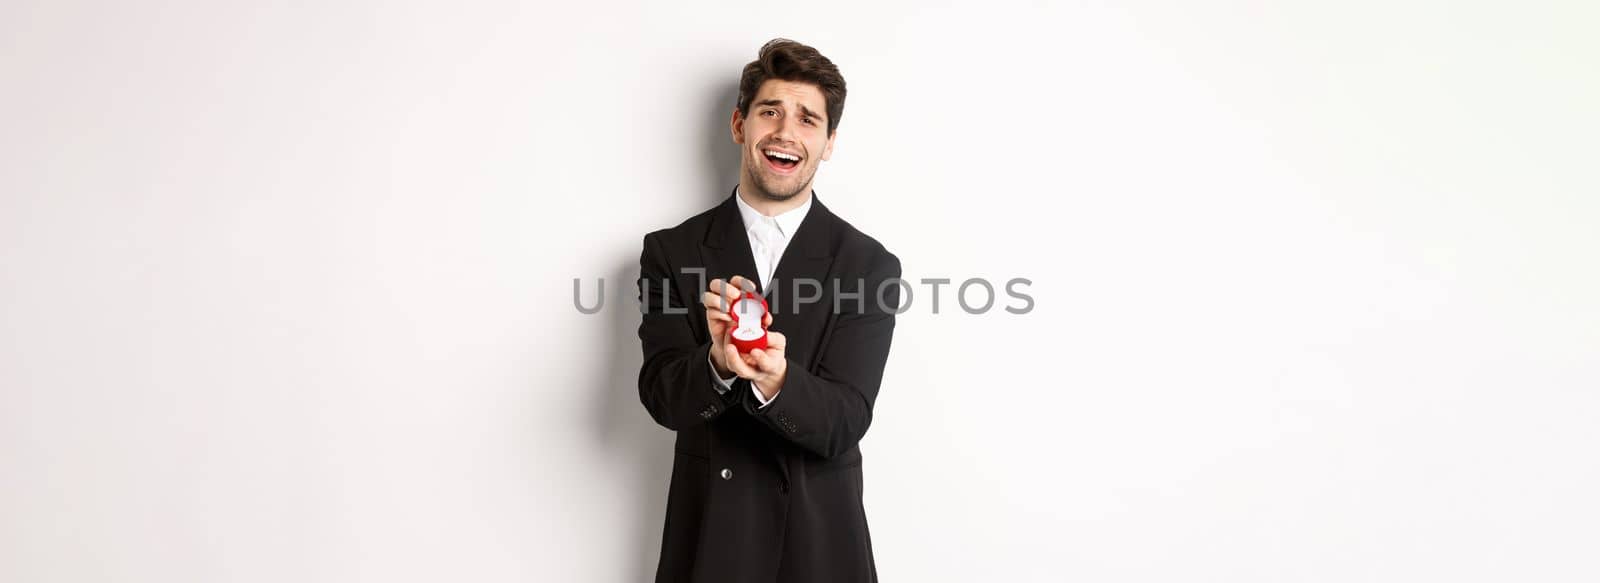 Portrait of handsome man in black suit, open box with wedding ring, making a proposal, asking to marry him, standing against white background.